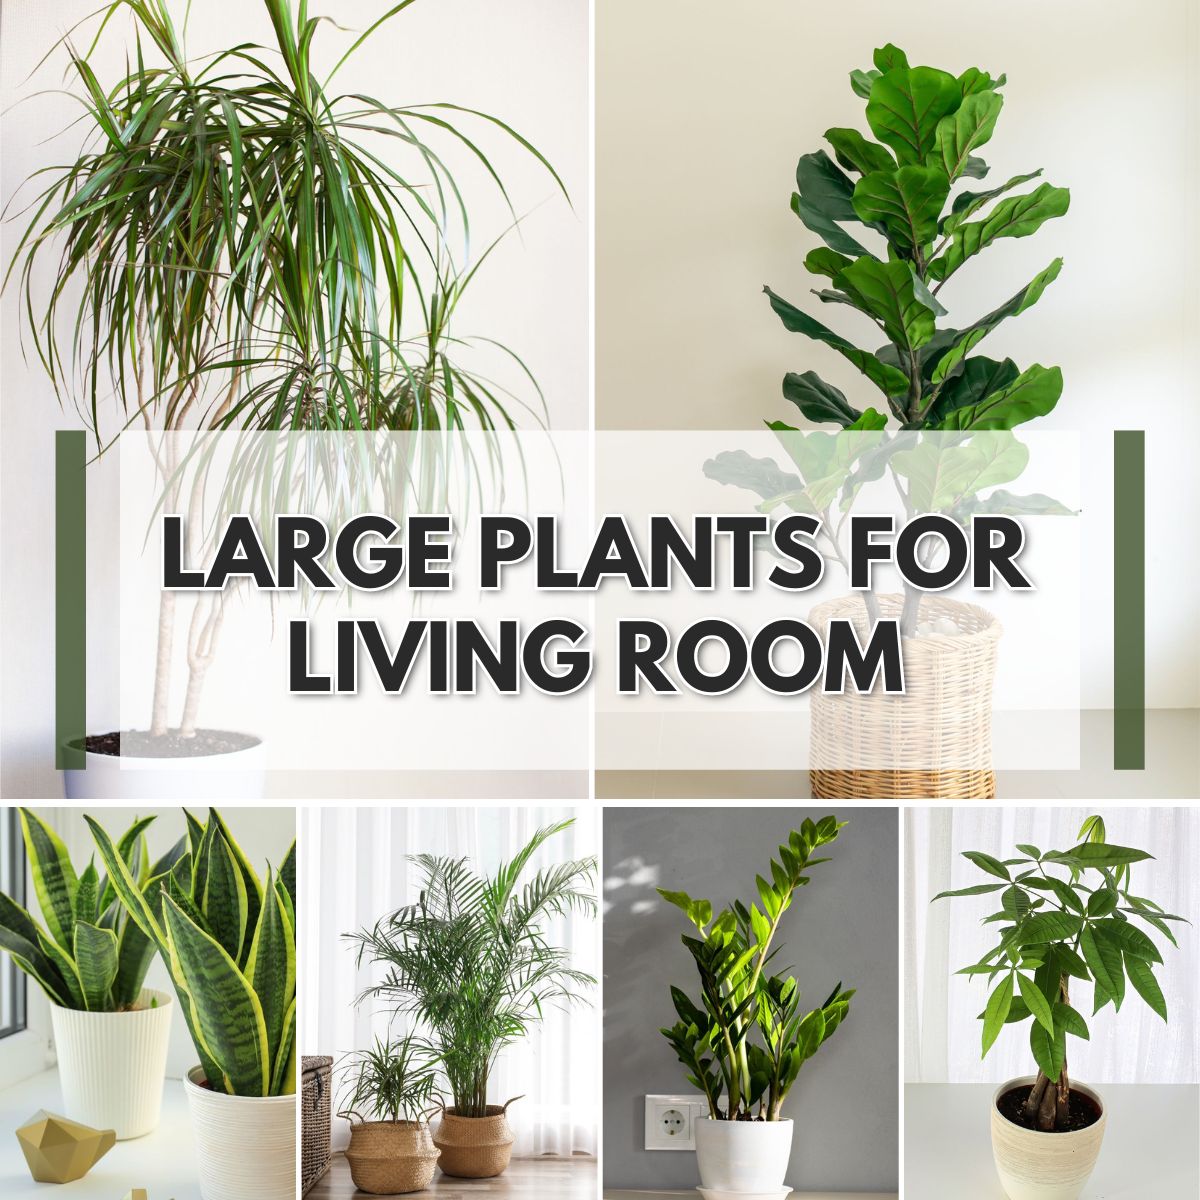 Large plants are perfect for creating a serene living room ambiance.